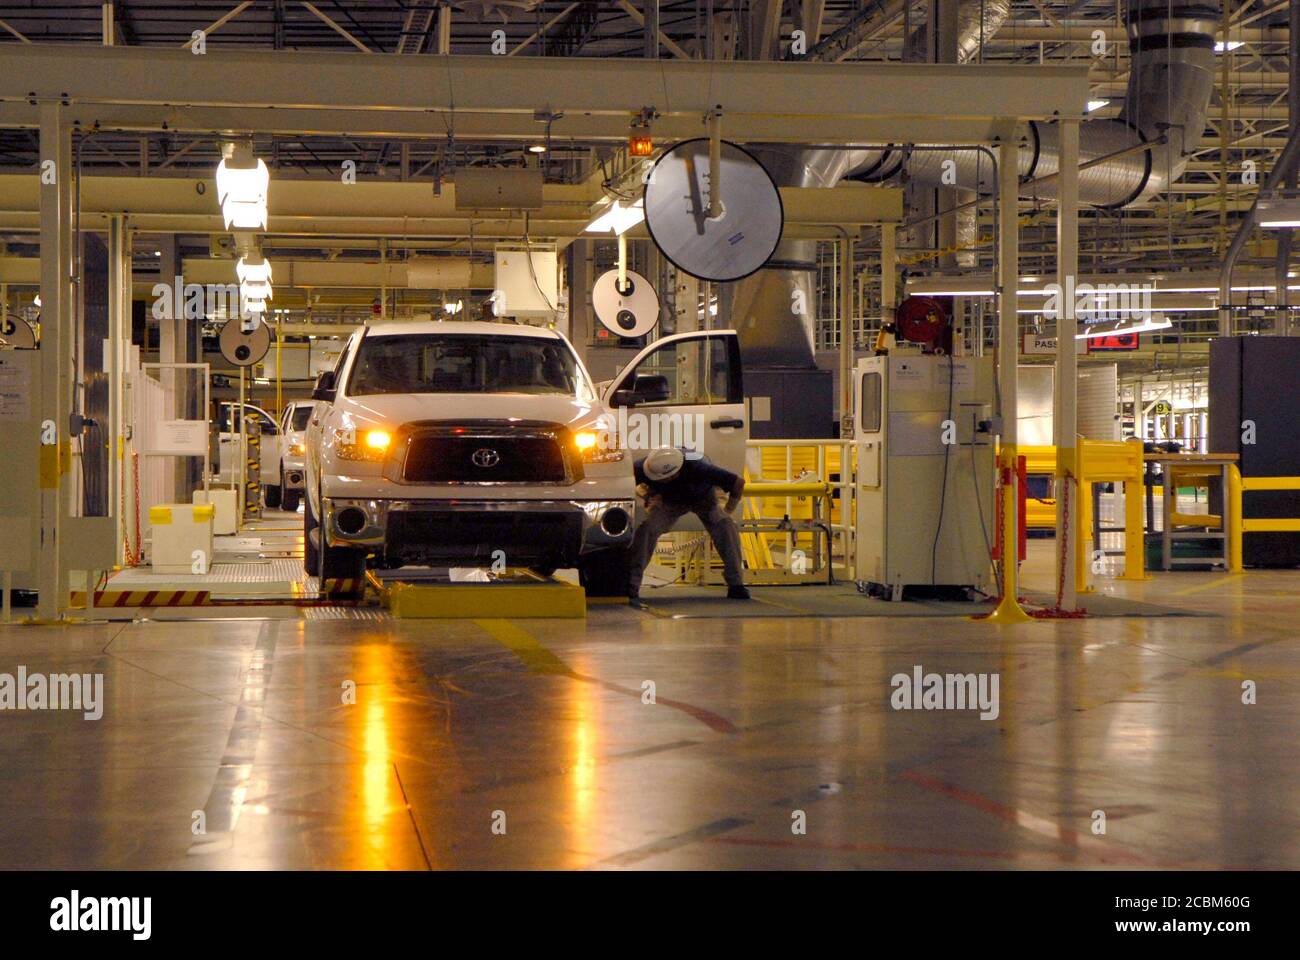 San Antonio, Texas, November 15, 2006:  New Toyota Tundra pickup truck assembly plant, with first 2007 models rolling off production line. ©Marjorie Cotera//Daemmrich Photography Stock Photo